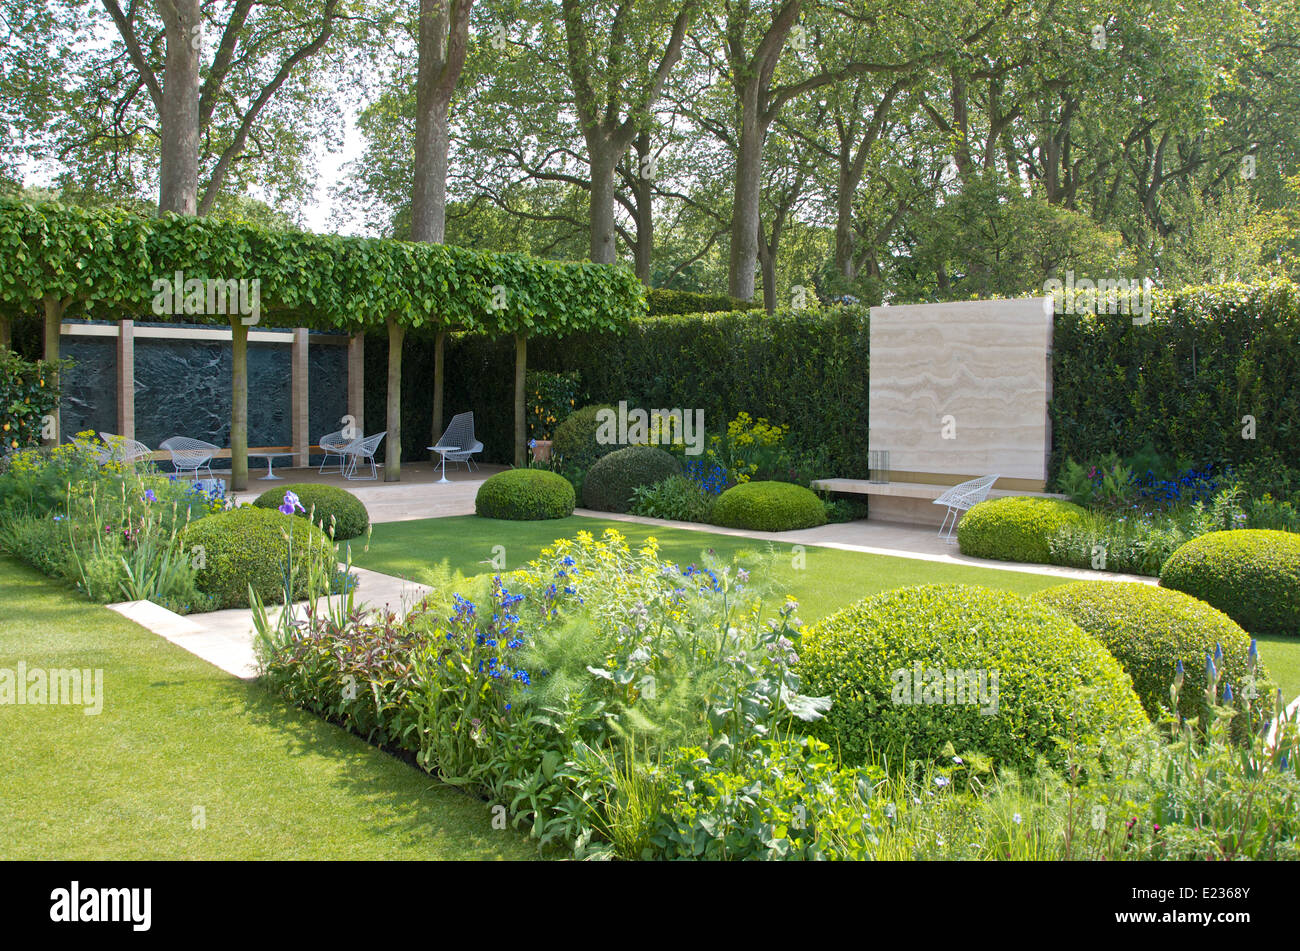 The Telegraph Garden, designed by Tommaso del Buono and Paul Gazerwitz at RHS Chelsea flower Show. Stock Photo